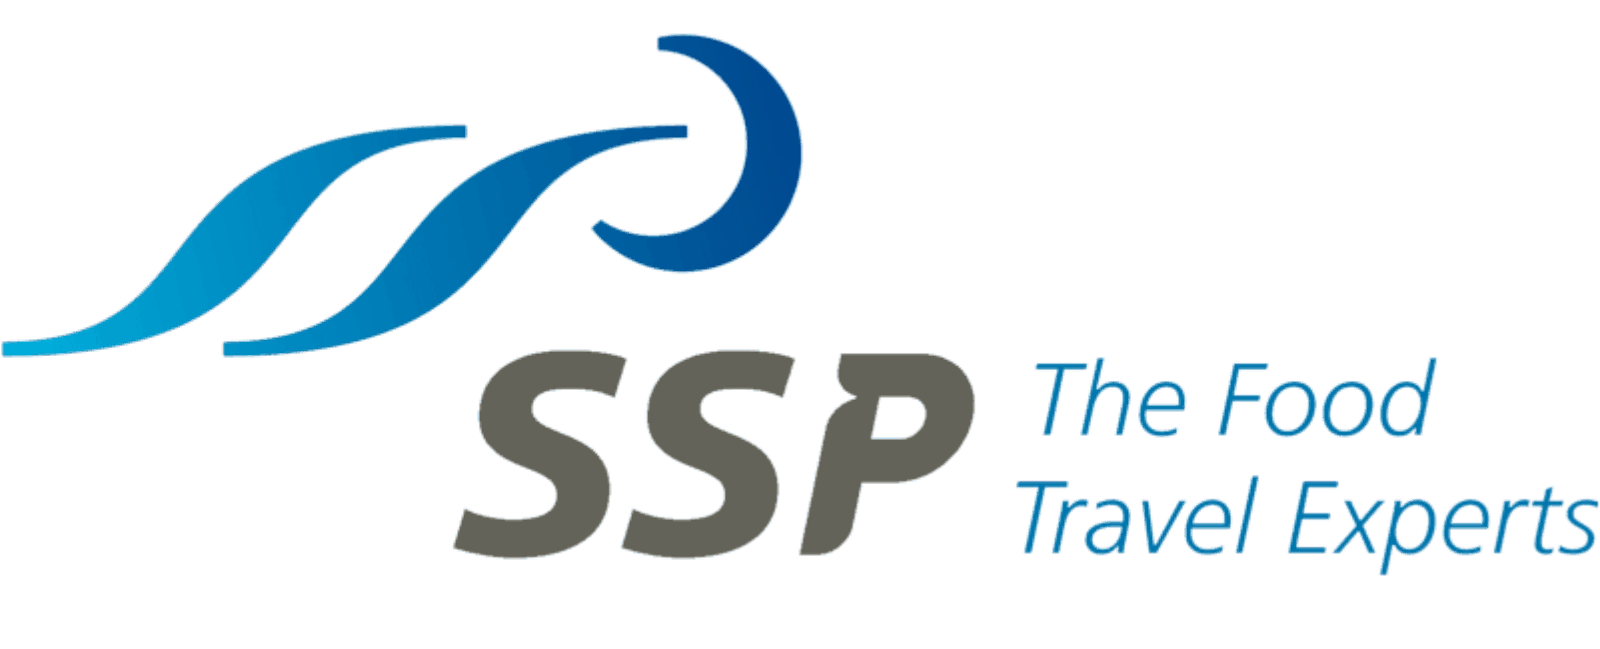 SSP The Food Travel Experts Logo